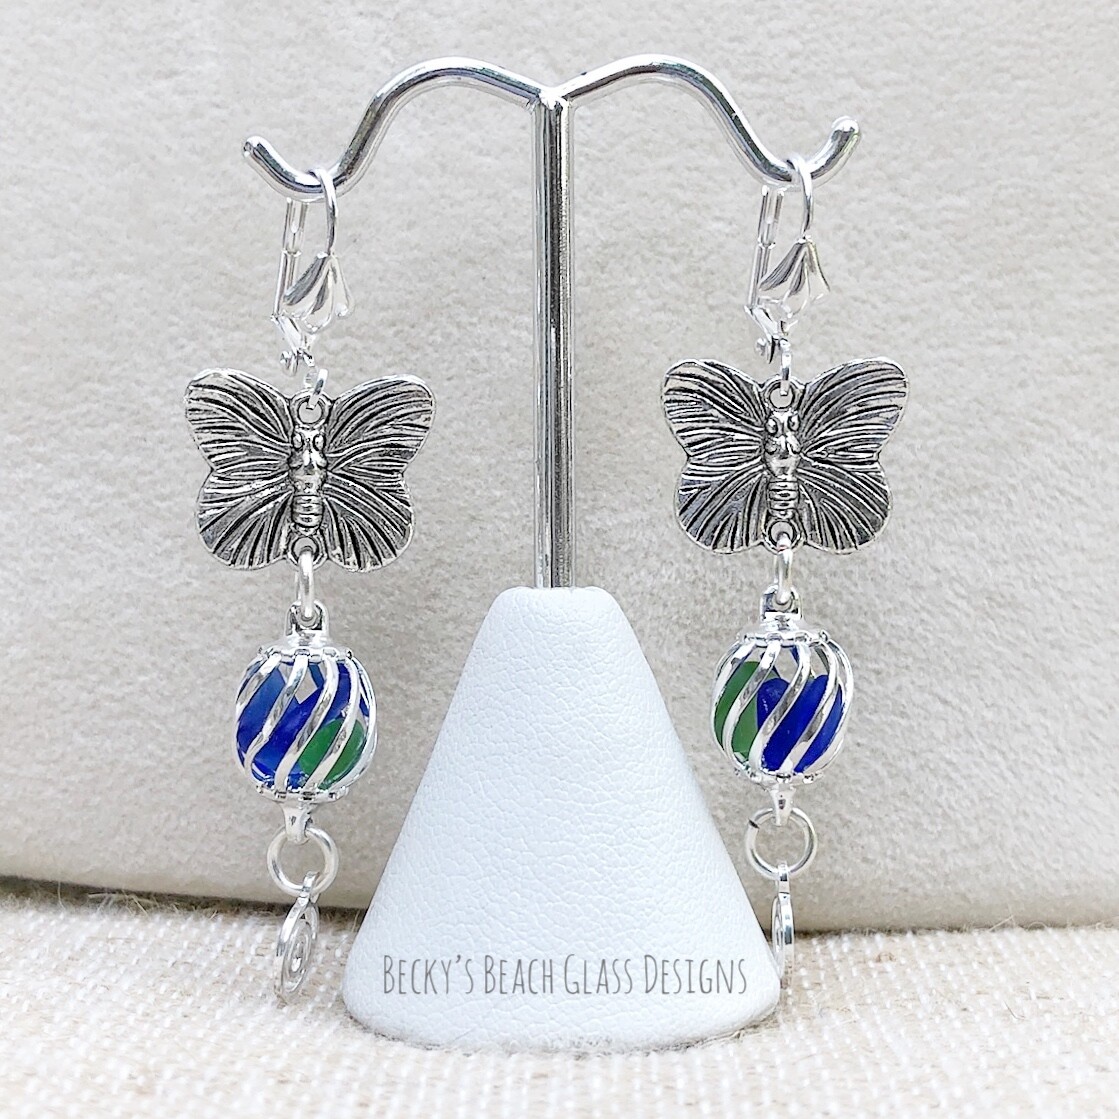 Butterfly Caged Blue/Green Sea Glass Earrings
(Sold Ashtabula Show 6/25-6/22)